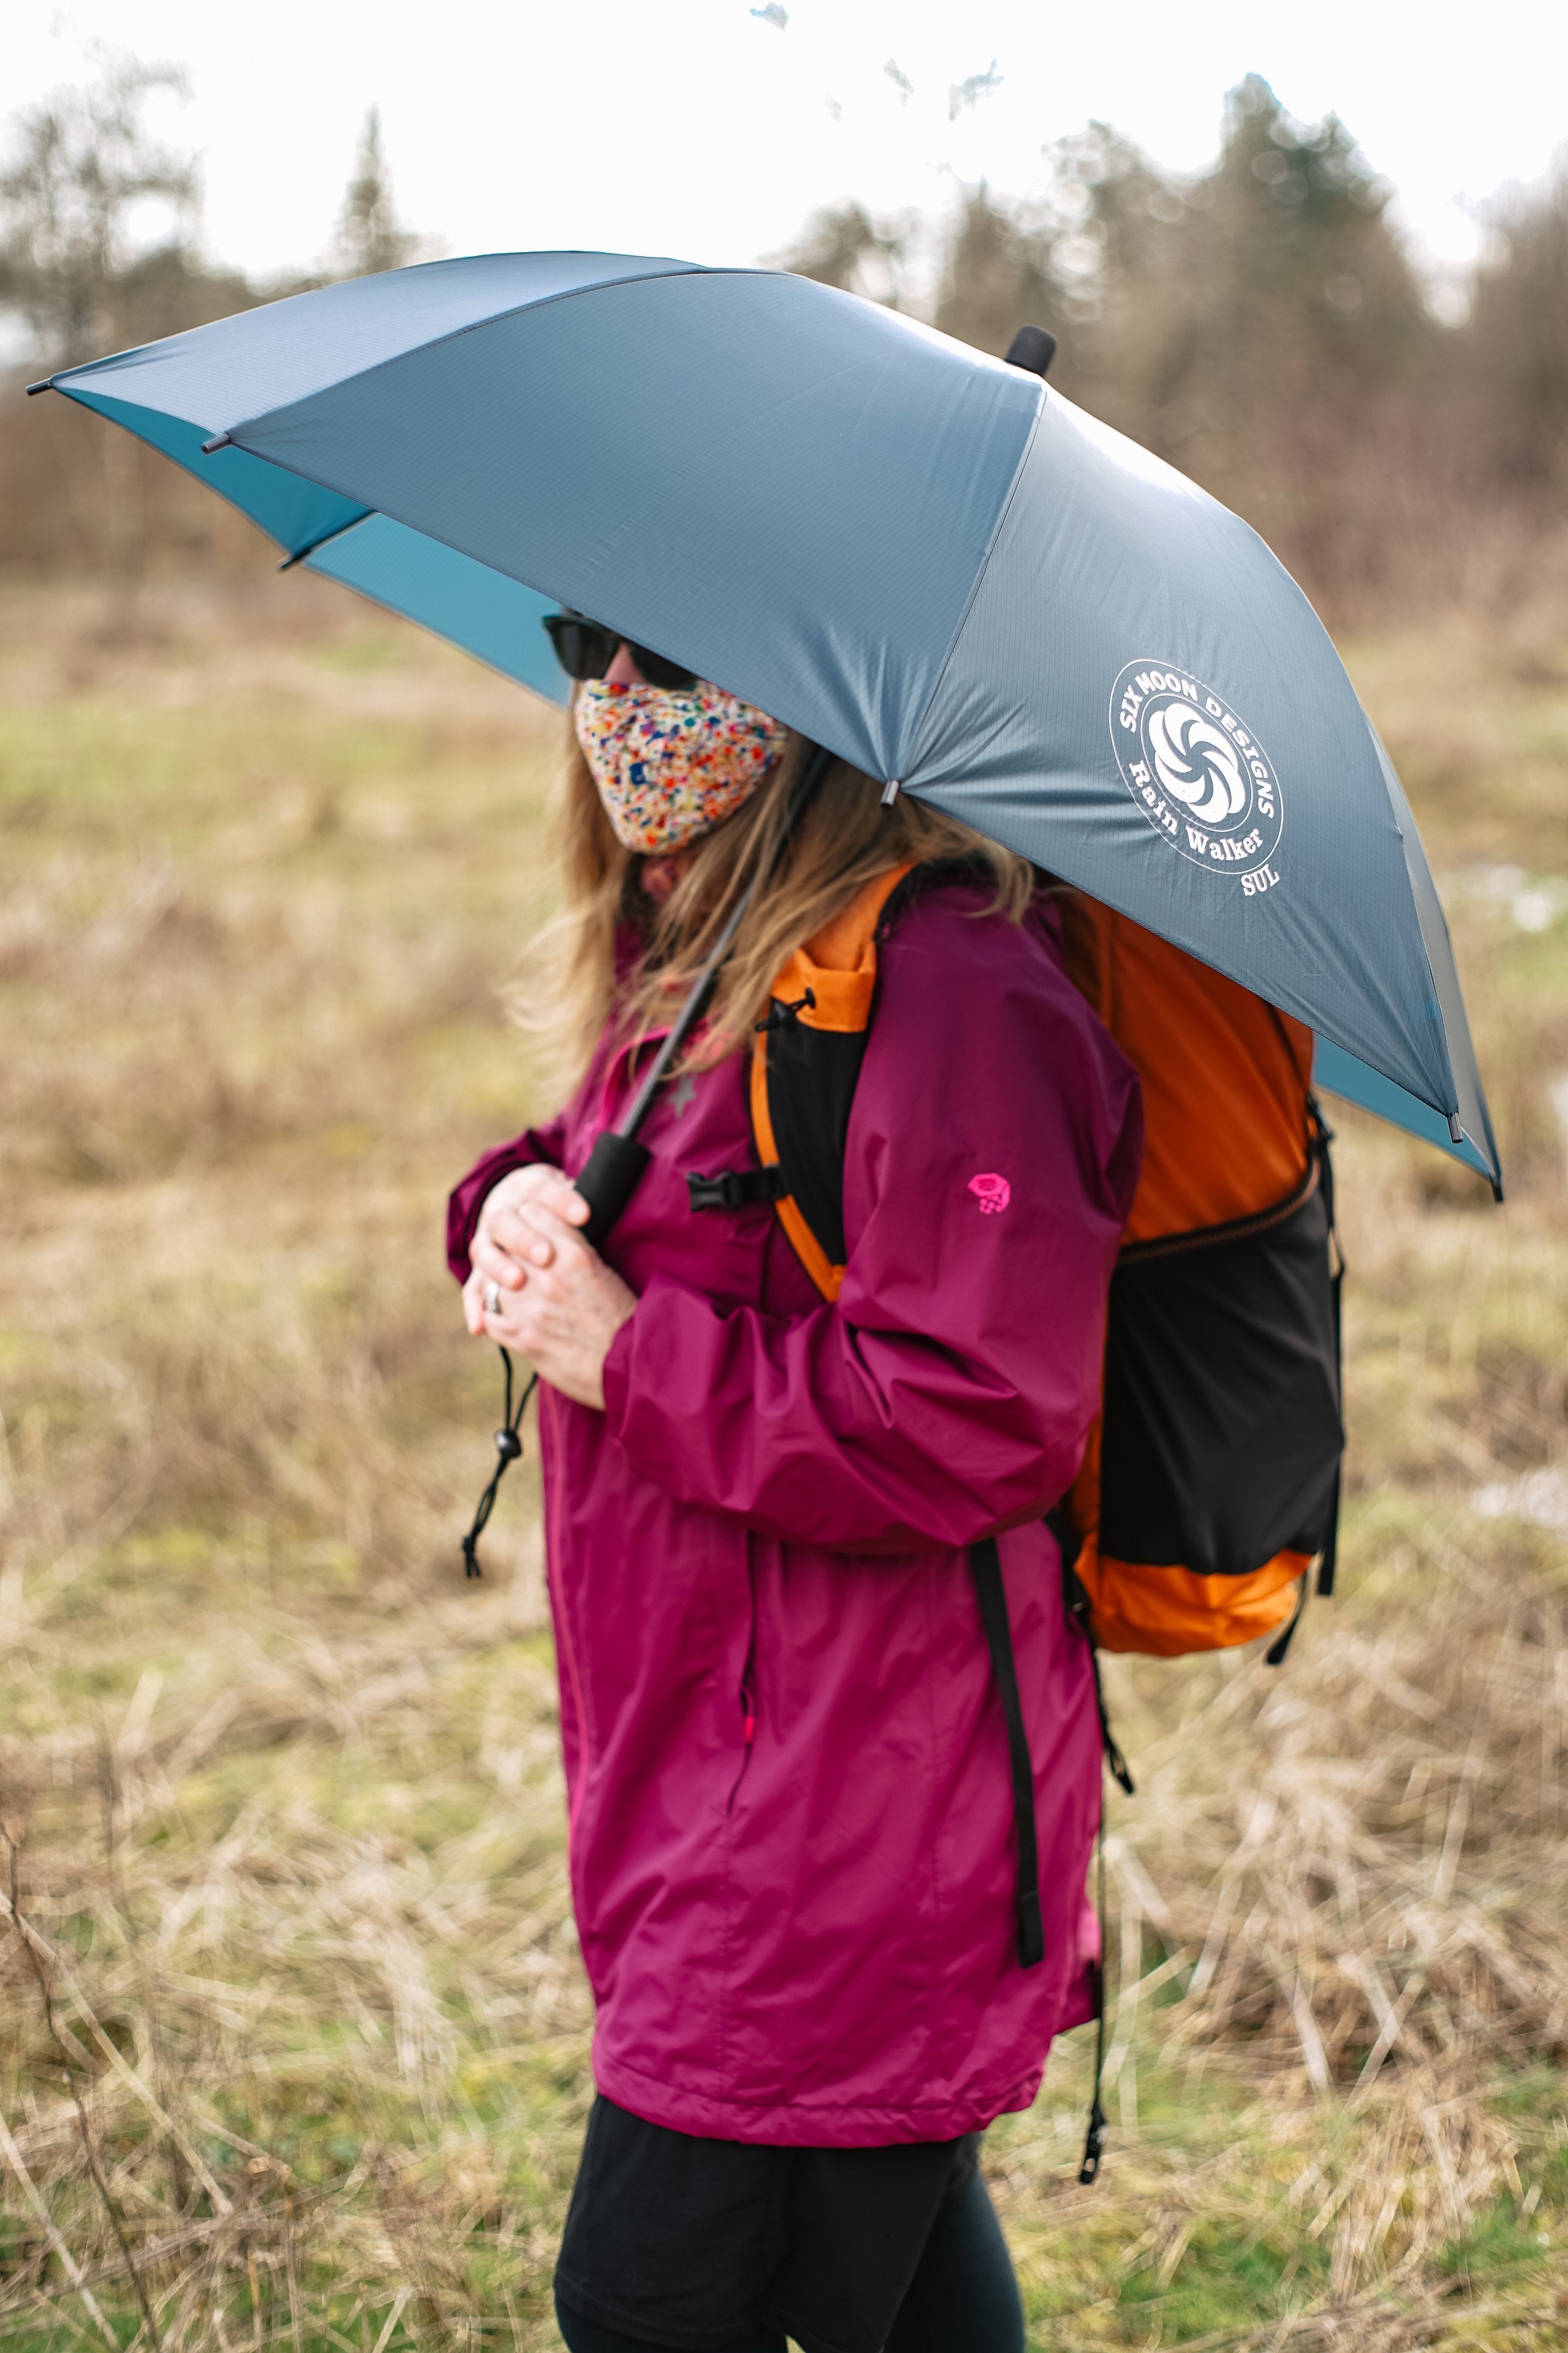 Hands free umbrella for backpacking or trekking